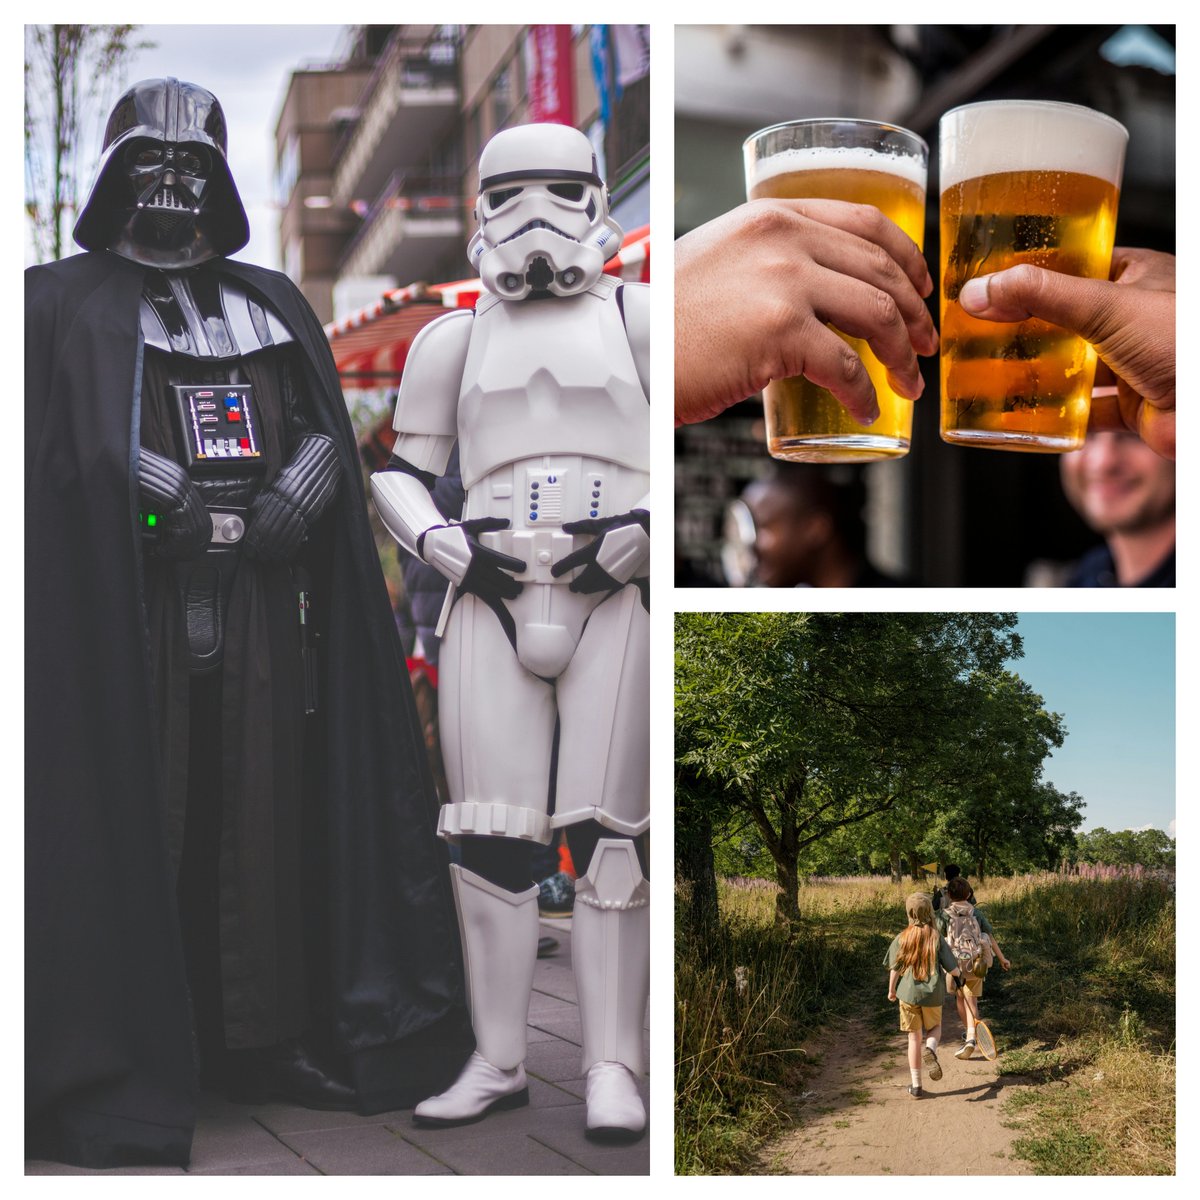 It’s Star Wars day tomorrow and the Force is strong in #SouthCambs this weekend. With comedy in Cottenham, an ale and hearty beer festival in Harlton, charity walks at Bartlow and events exploring the environment and climate change in Fulbourn, there’s something for everyone 1/2